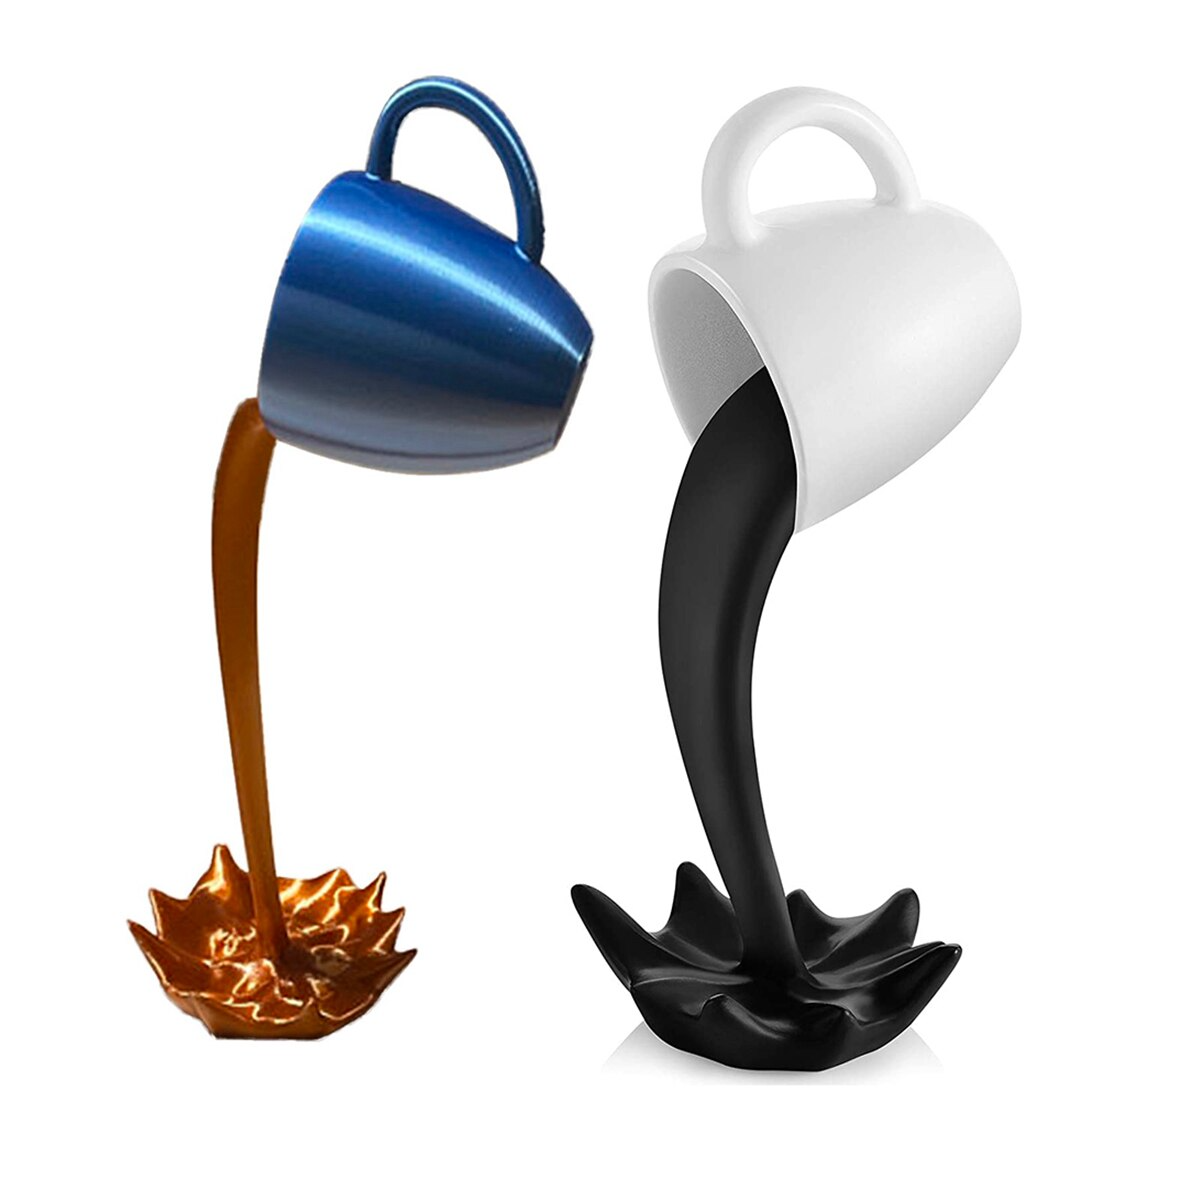 Floating Spilling Coffee Cup Sculpture Kitchen Decoration Spilling